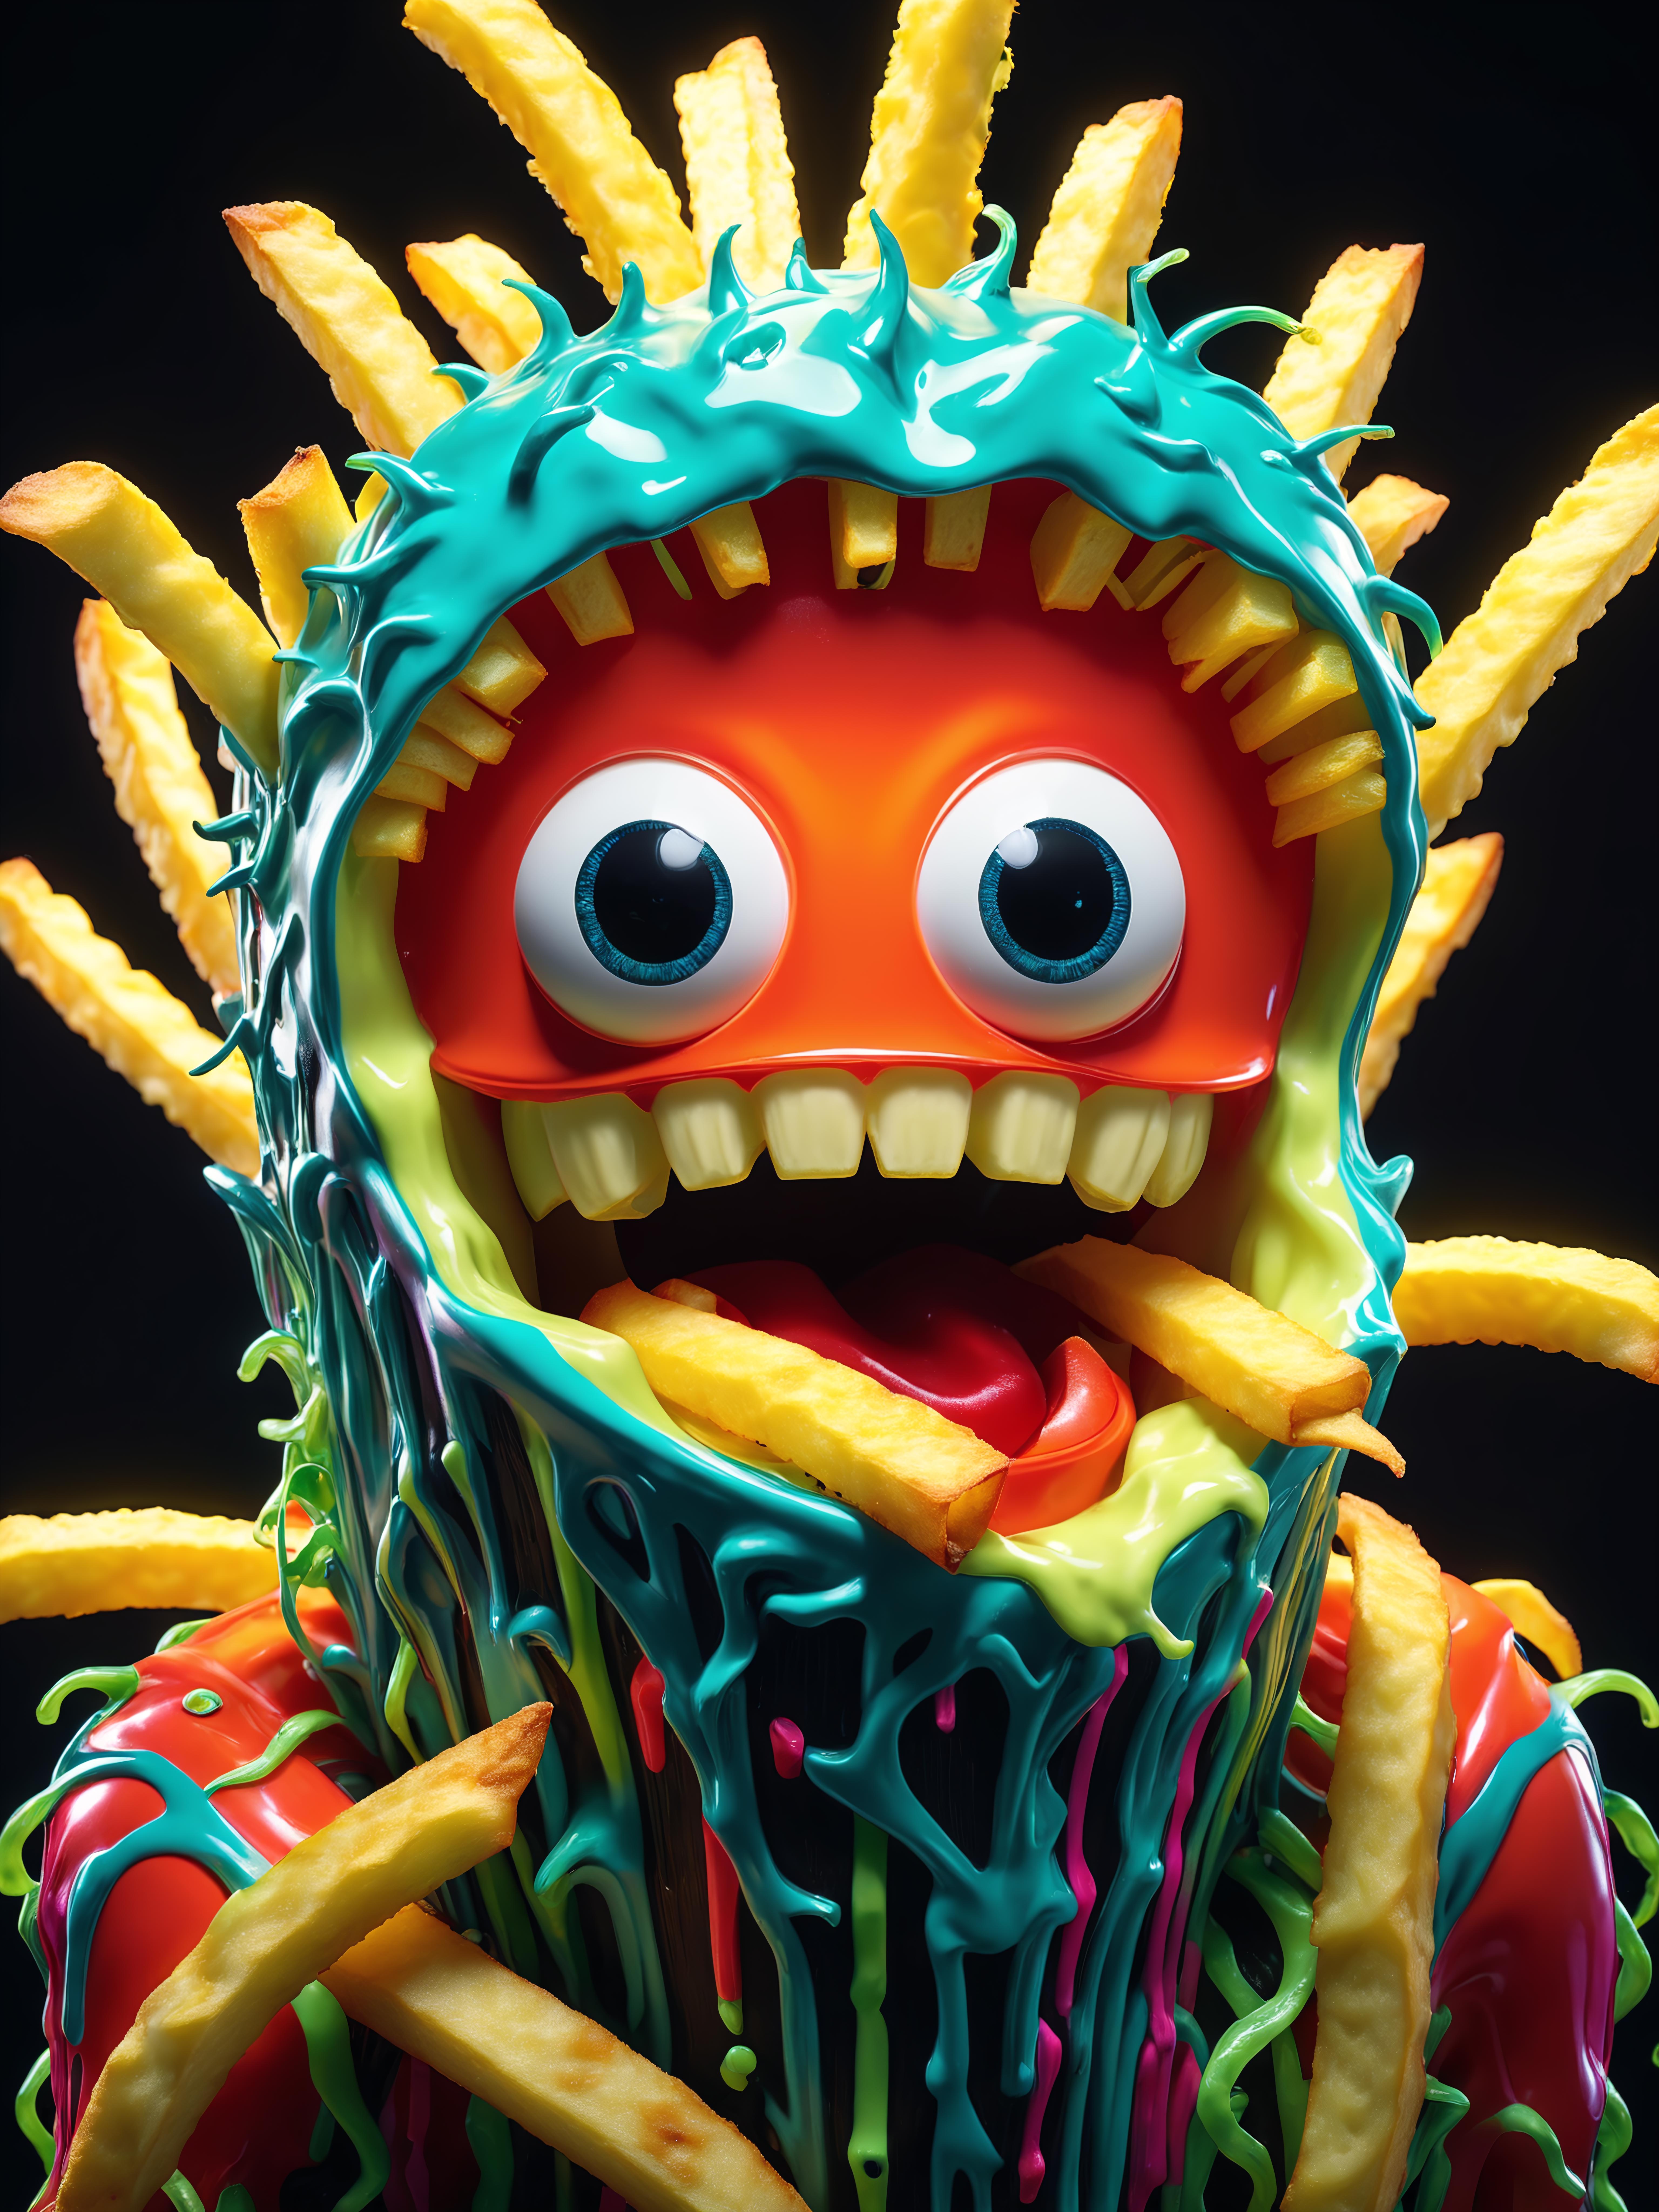 A large, green, and orange monster with a mouth full of fries.